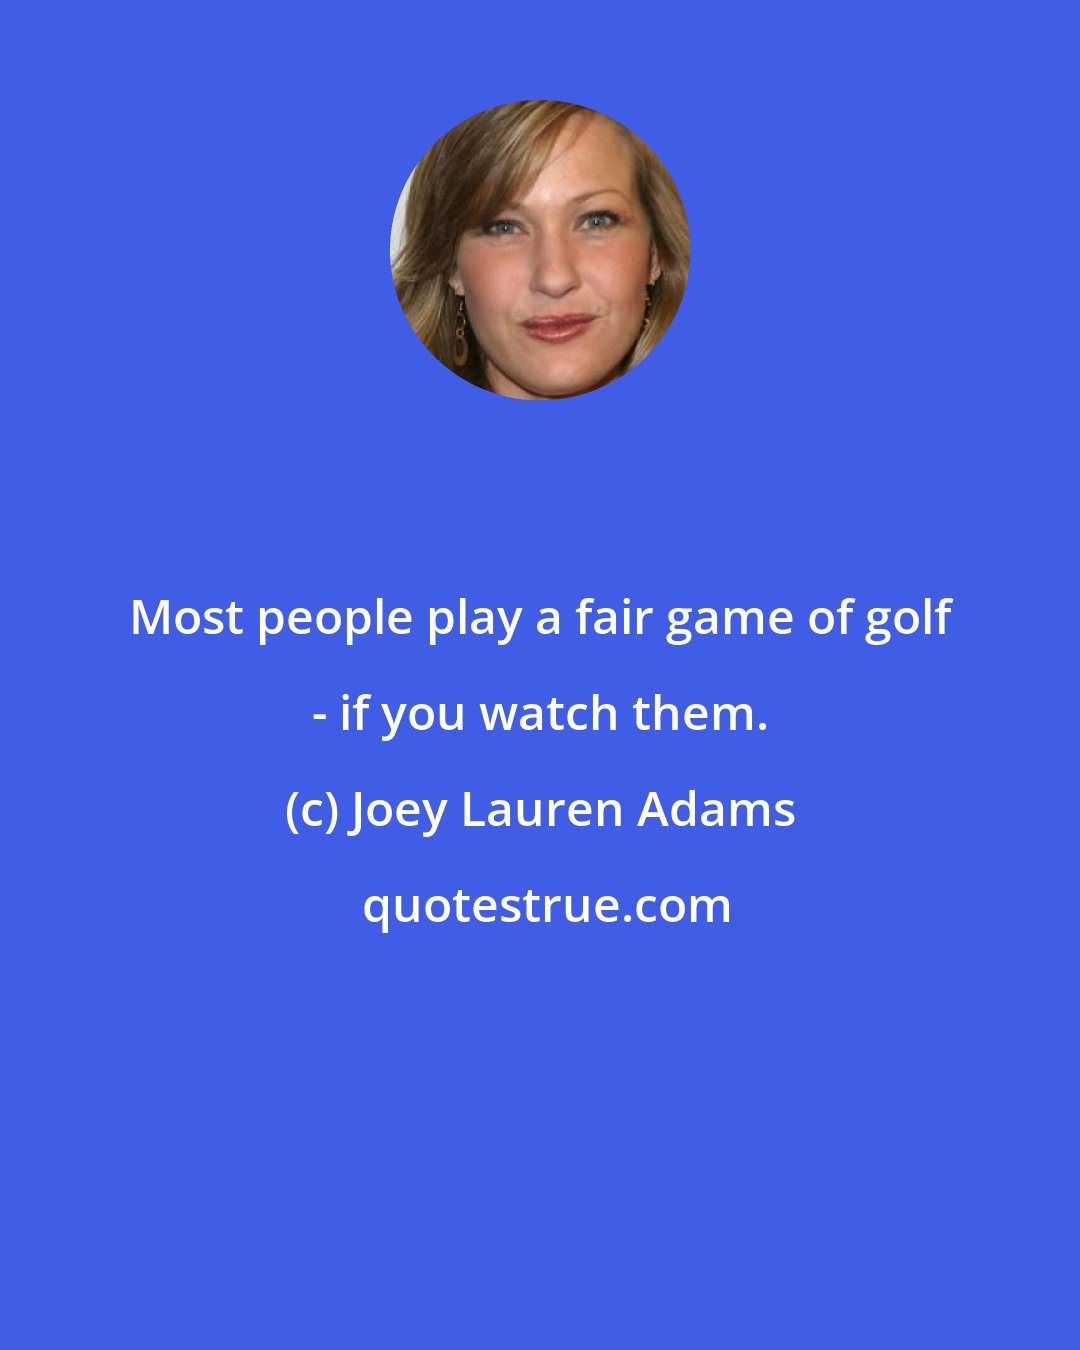 Joey Lauren Adams: Most people play a fair game of golf - if you watch them.